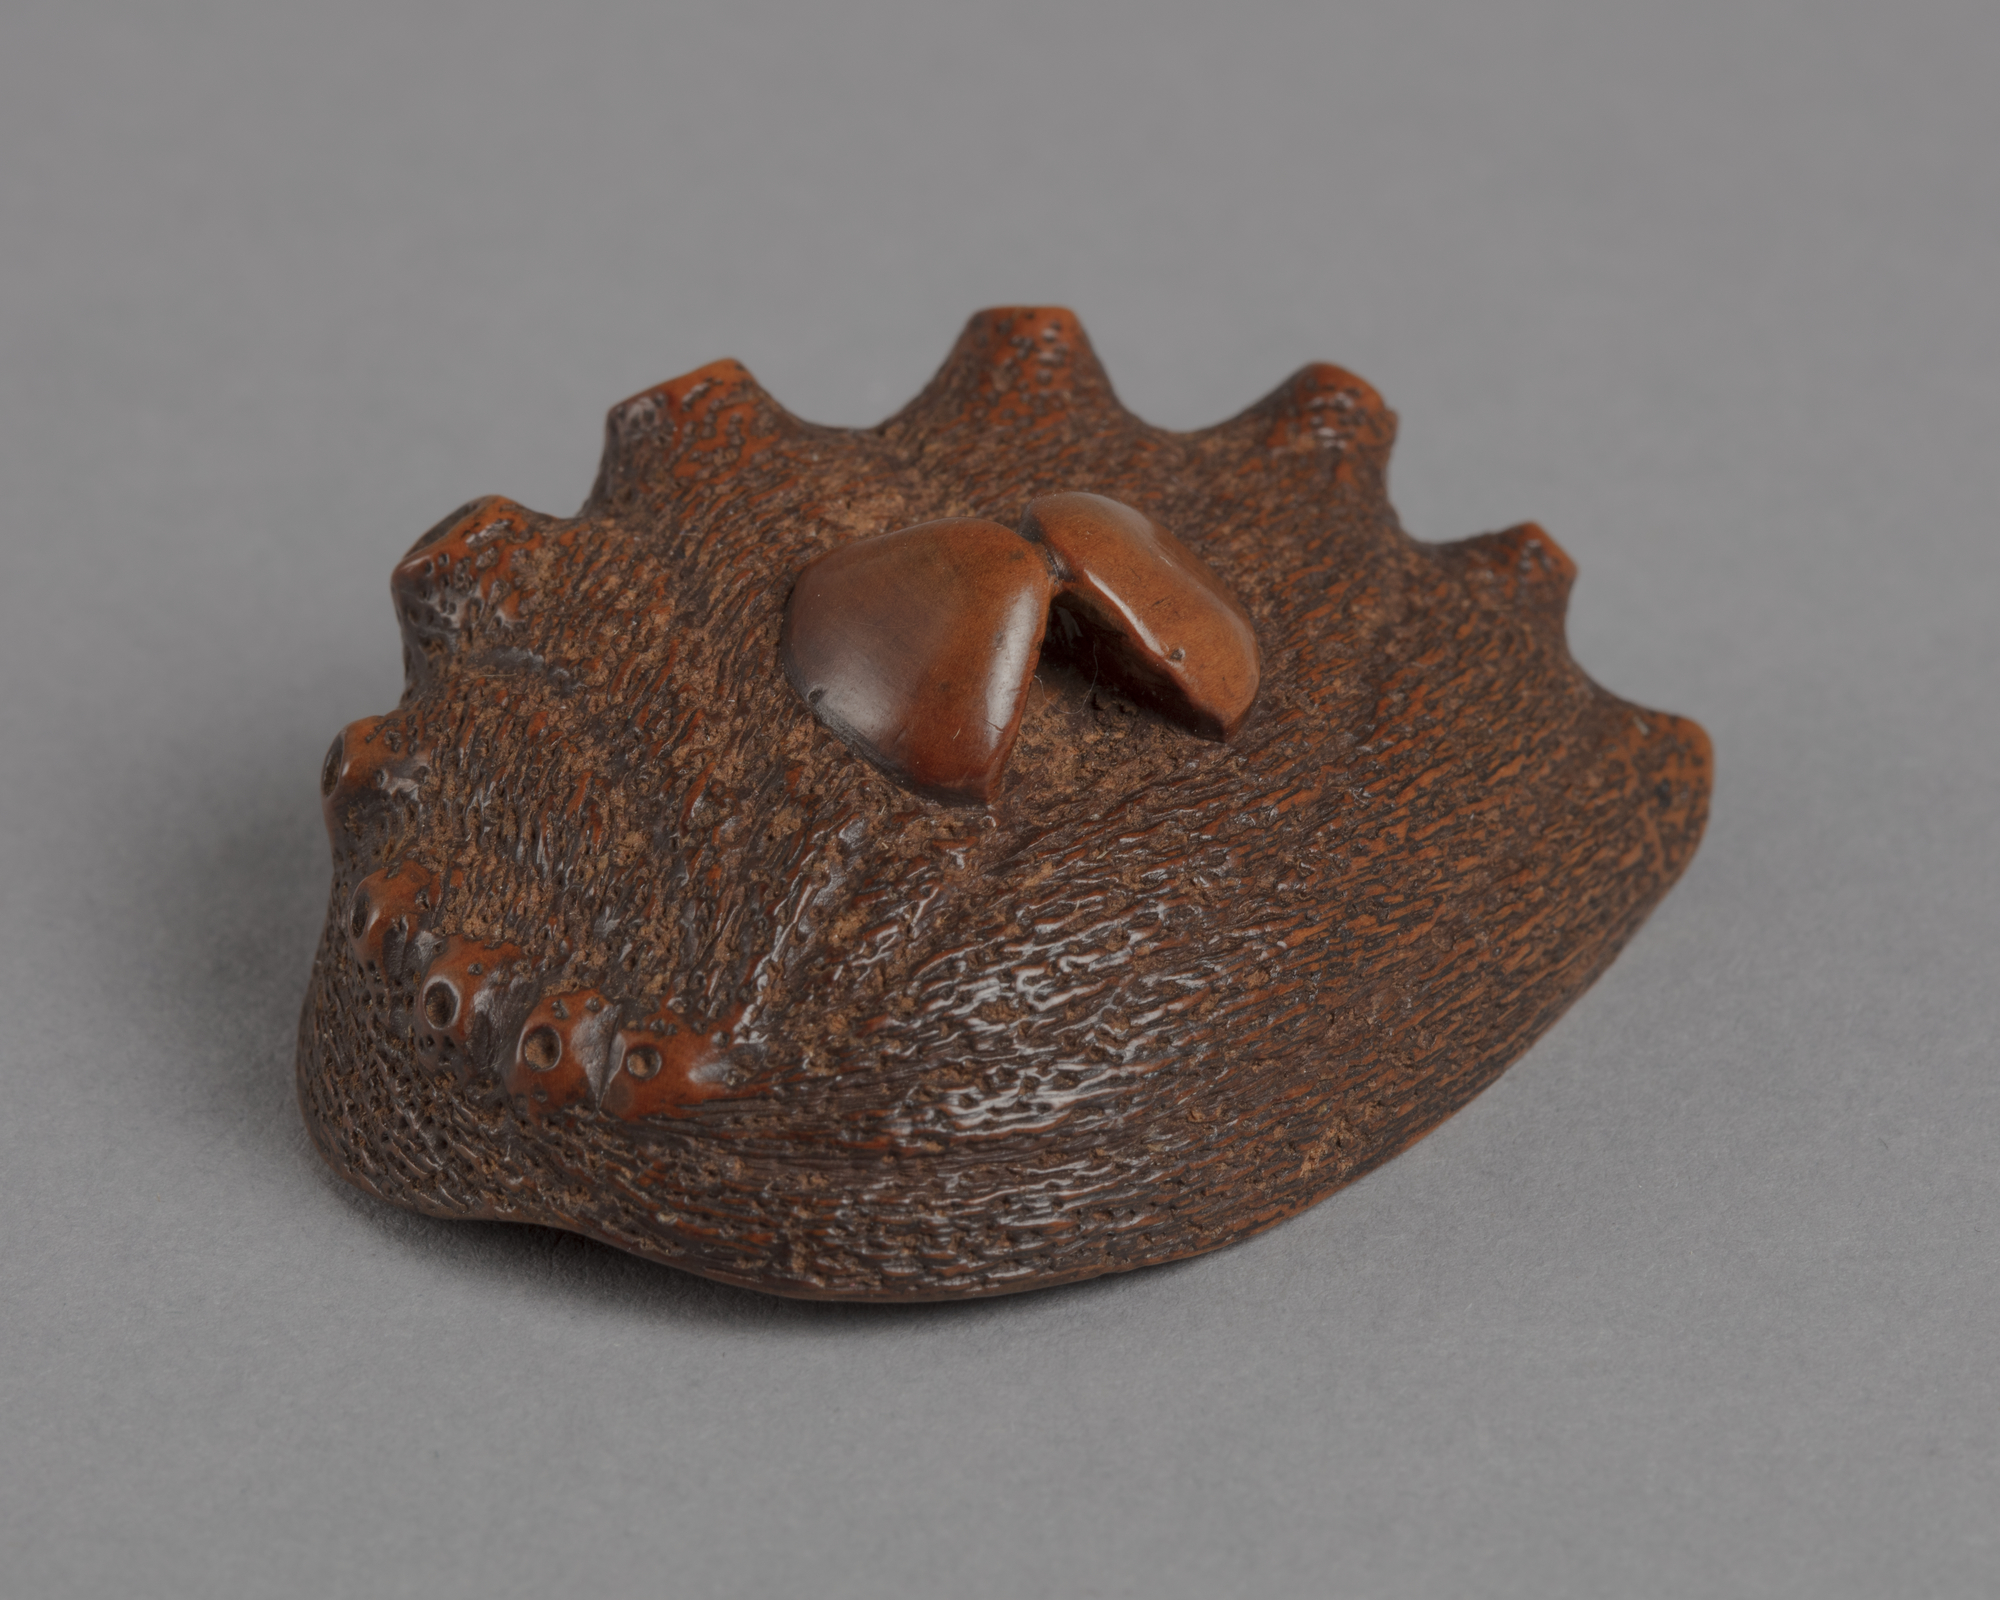 A Japanese boxwood netsuke of an abalone shell with a row of protruding holes. A small open clam on the side.